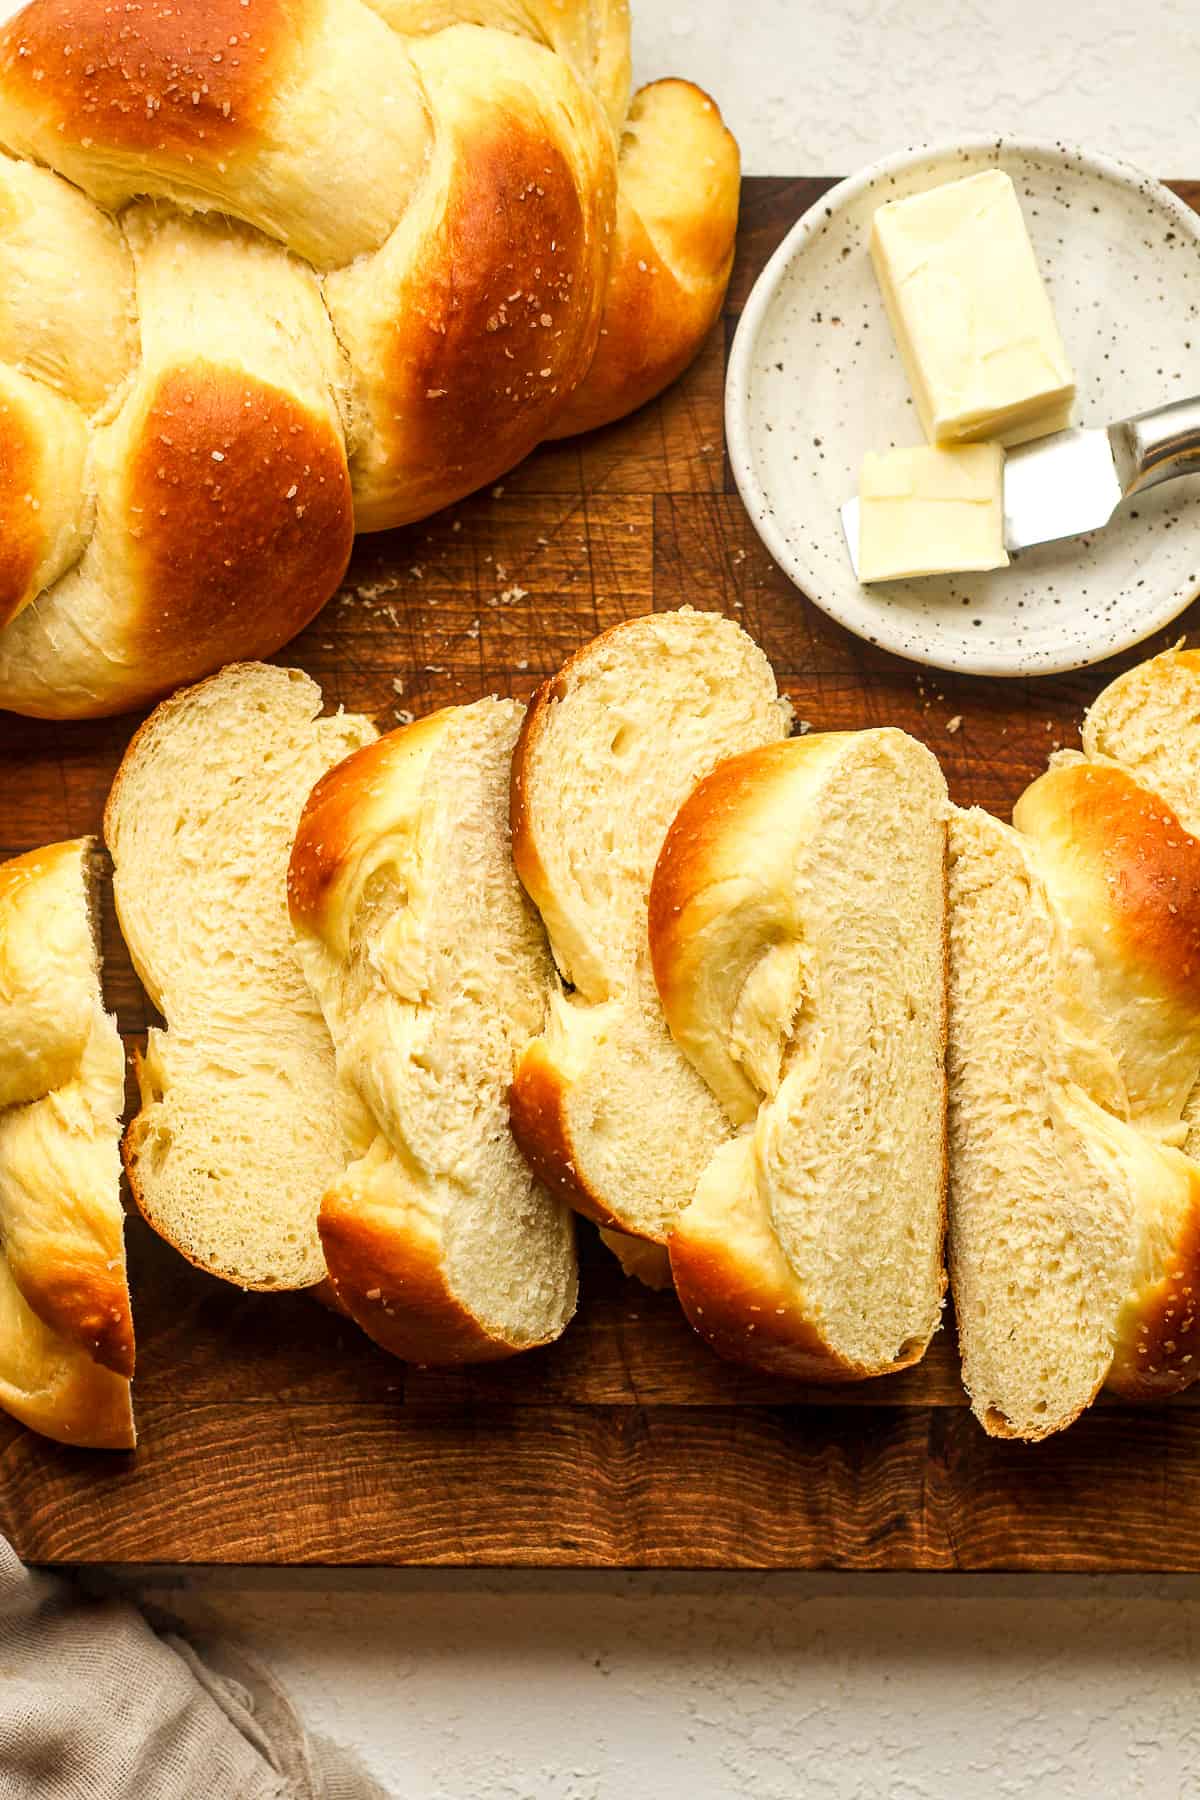 Overhead view of sliced brioche bread with a plate of butter.